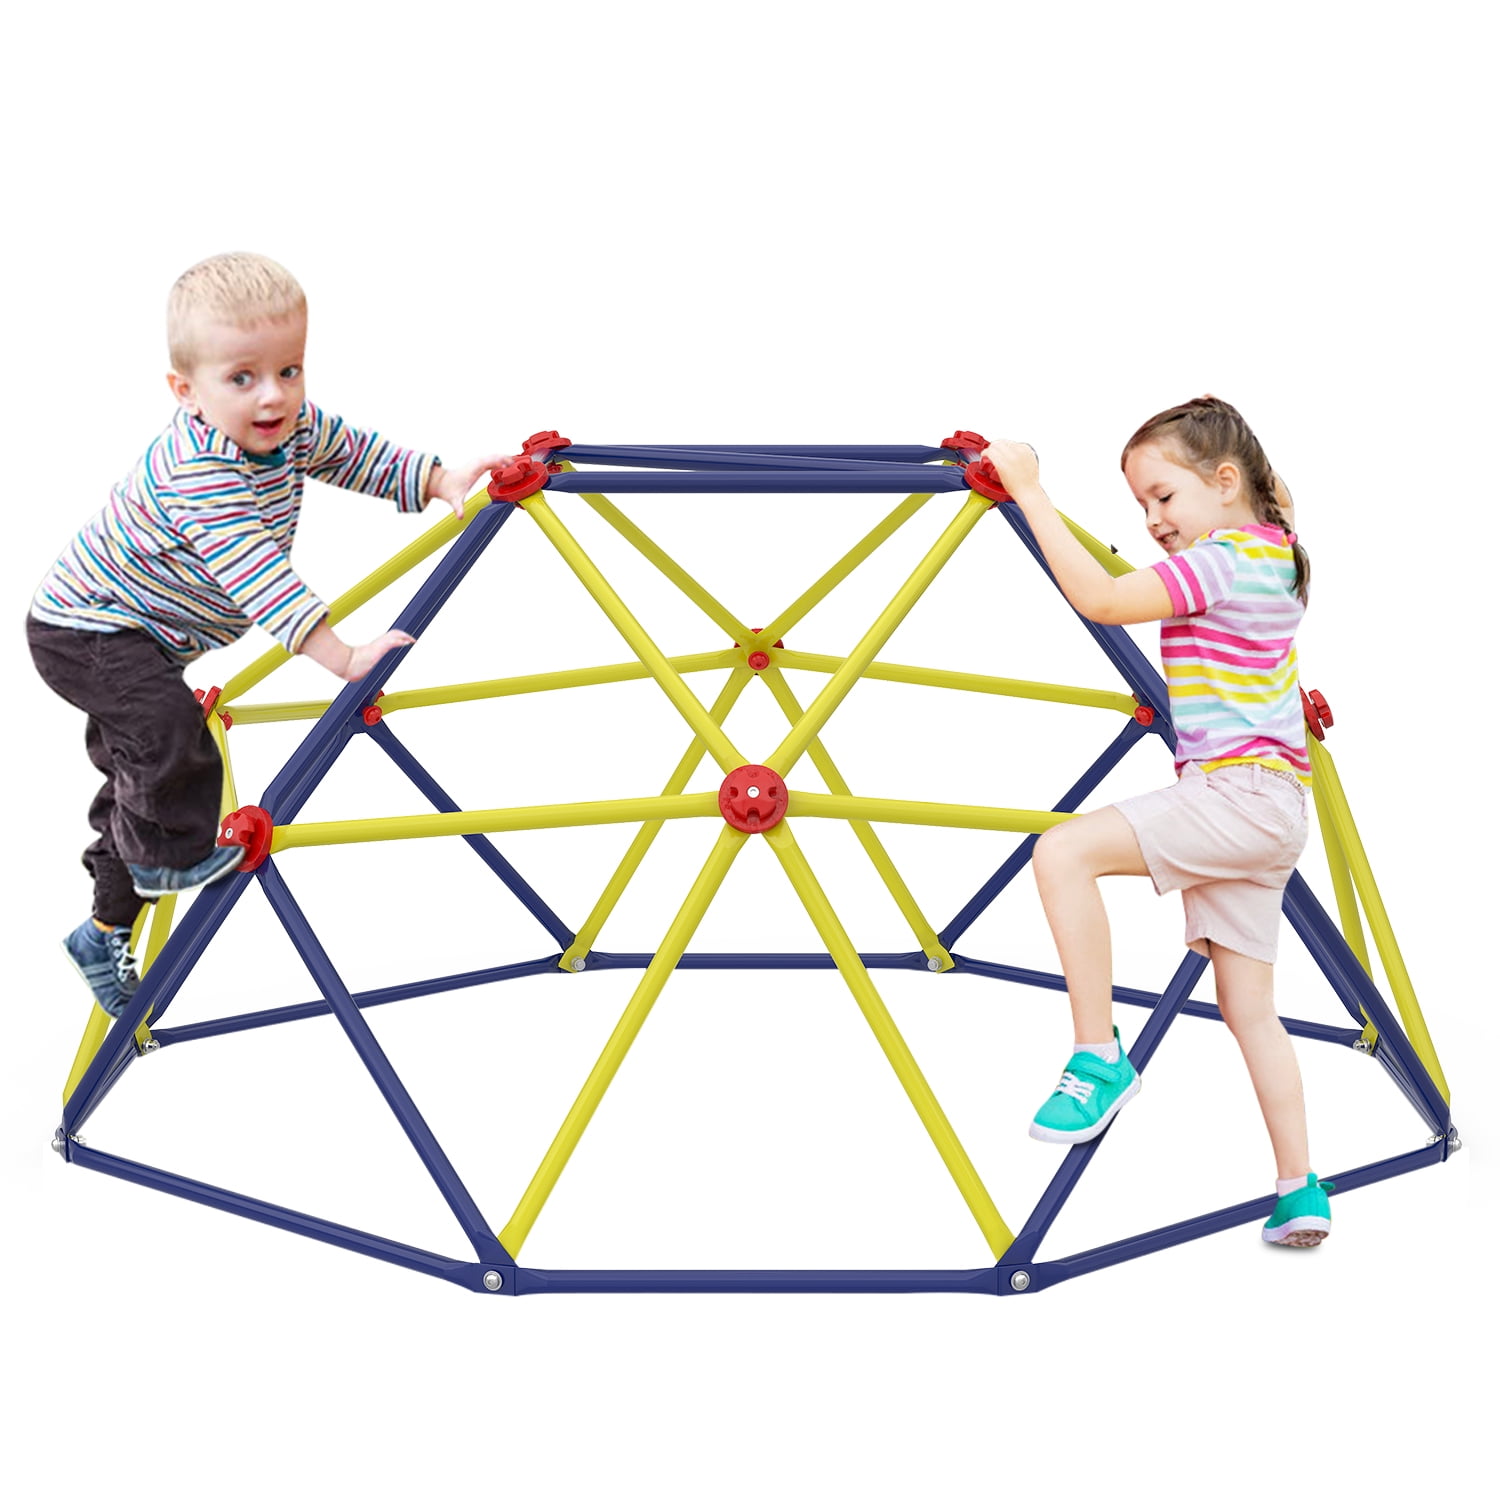 6ft Outdoor Dome Climber, Kids Jungle Gym Dome for 3-5 Years Old $79.99